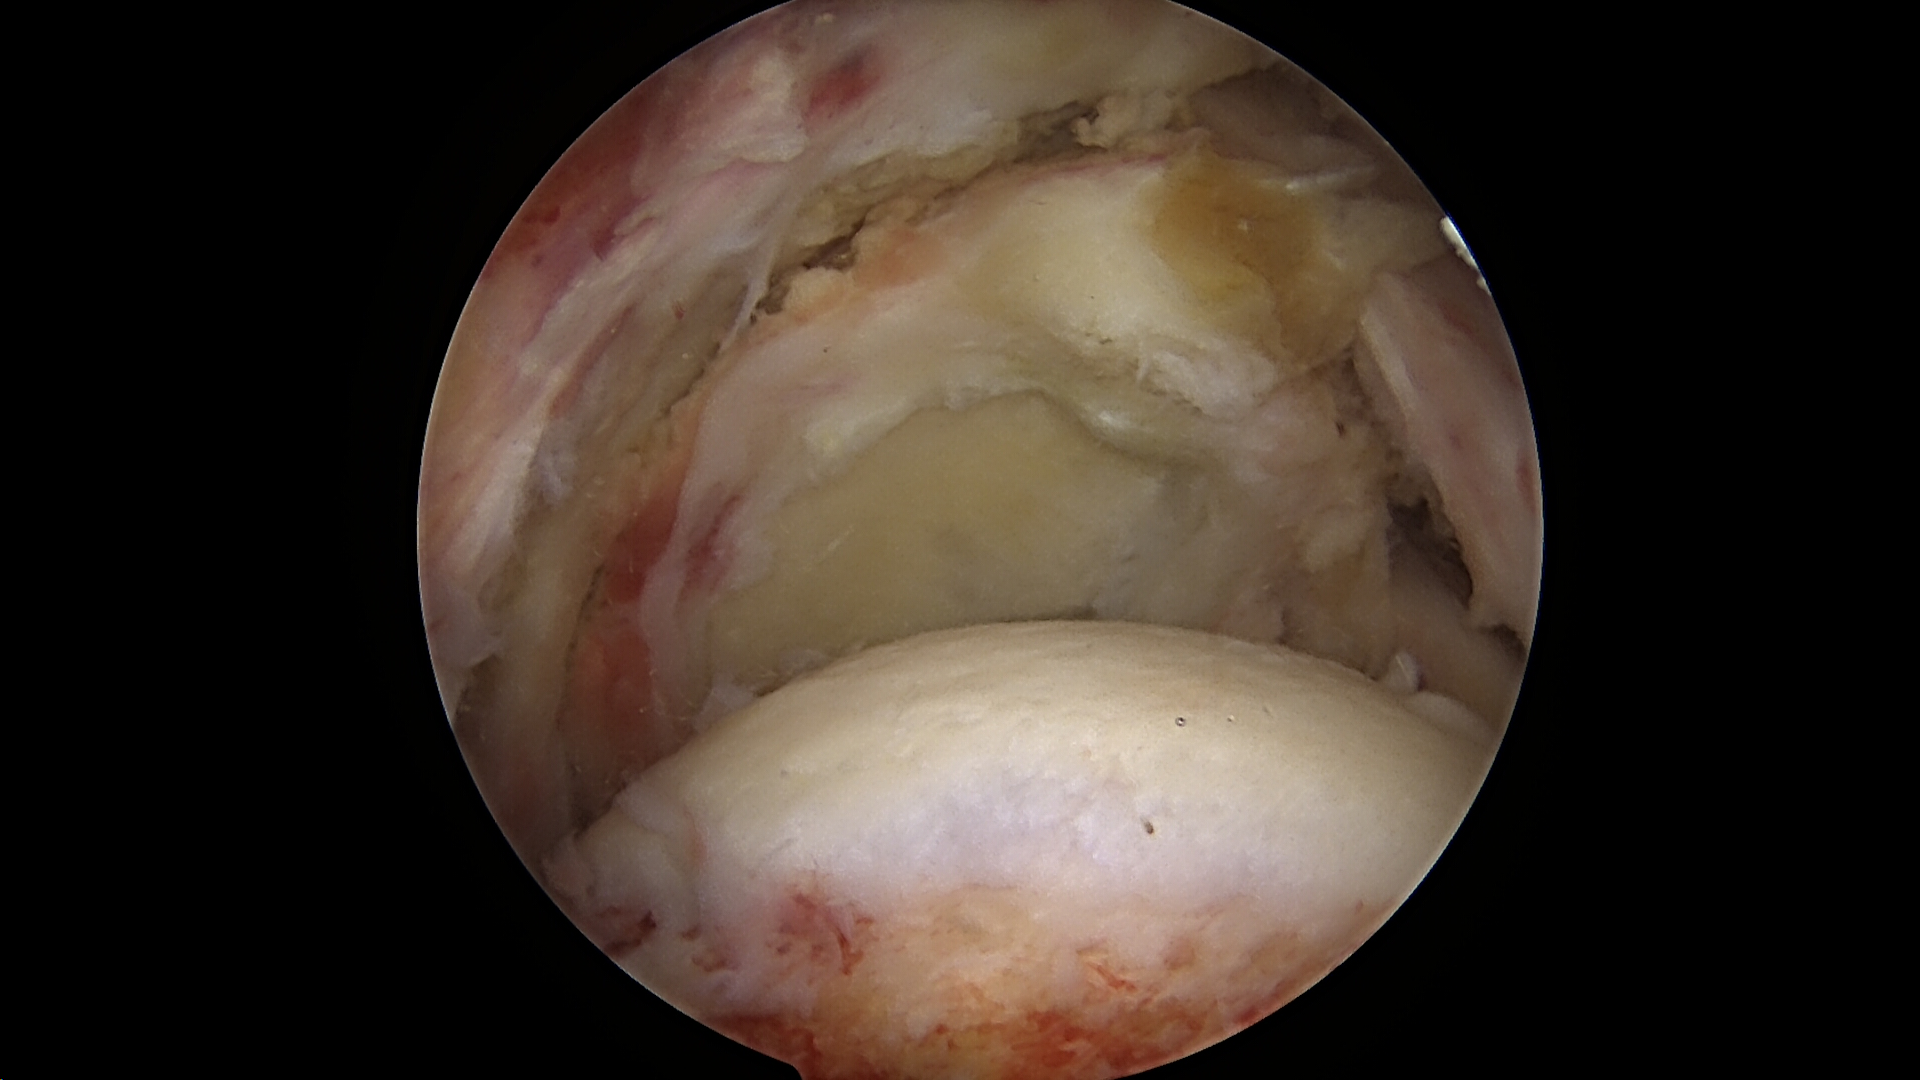 Massive retracted rotator cuff tear viewed from the lateral portal